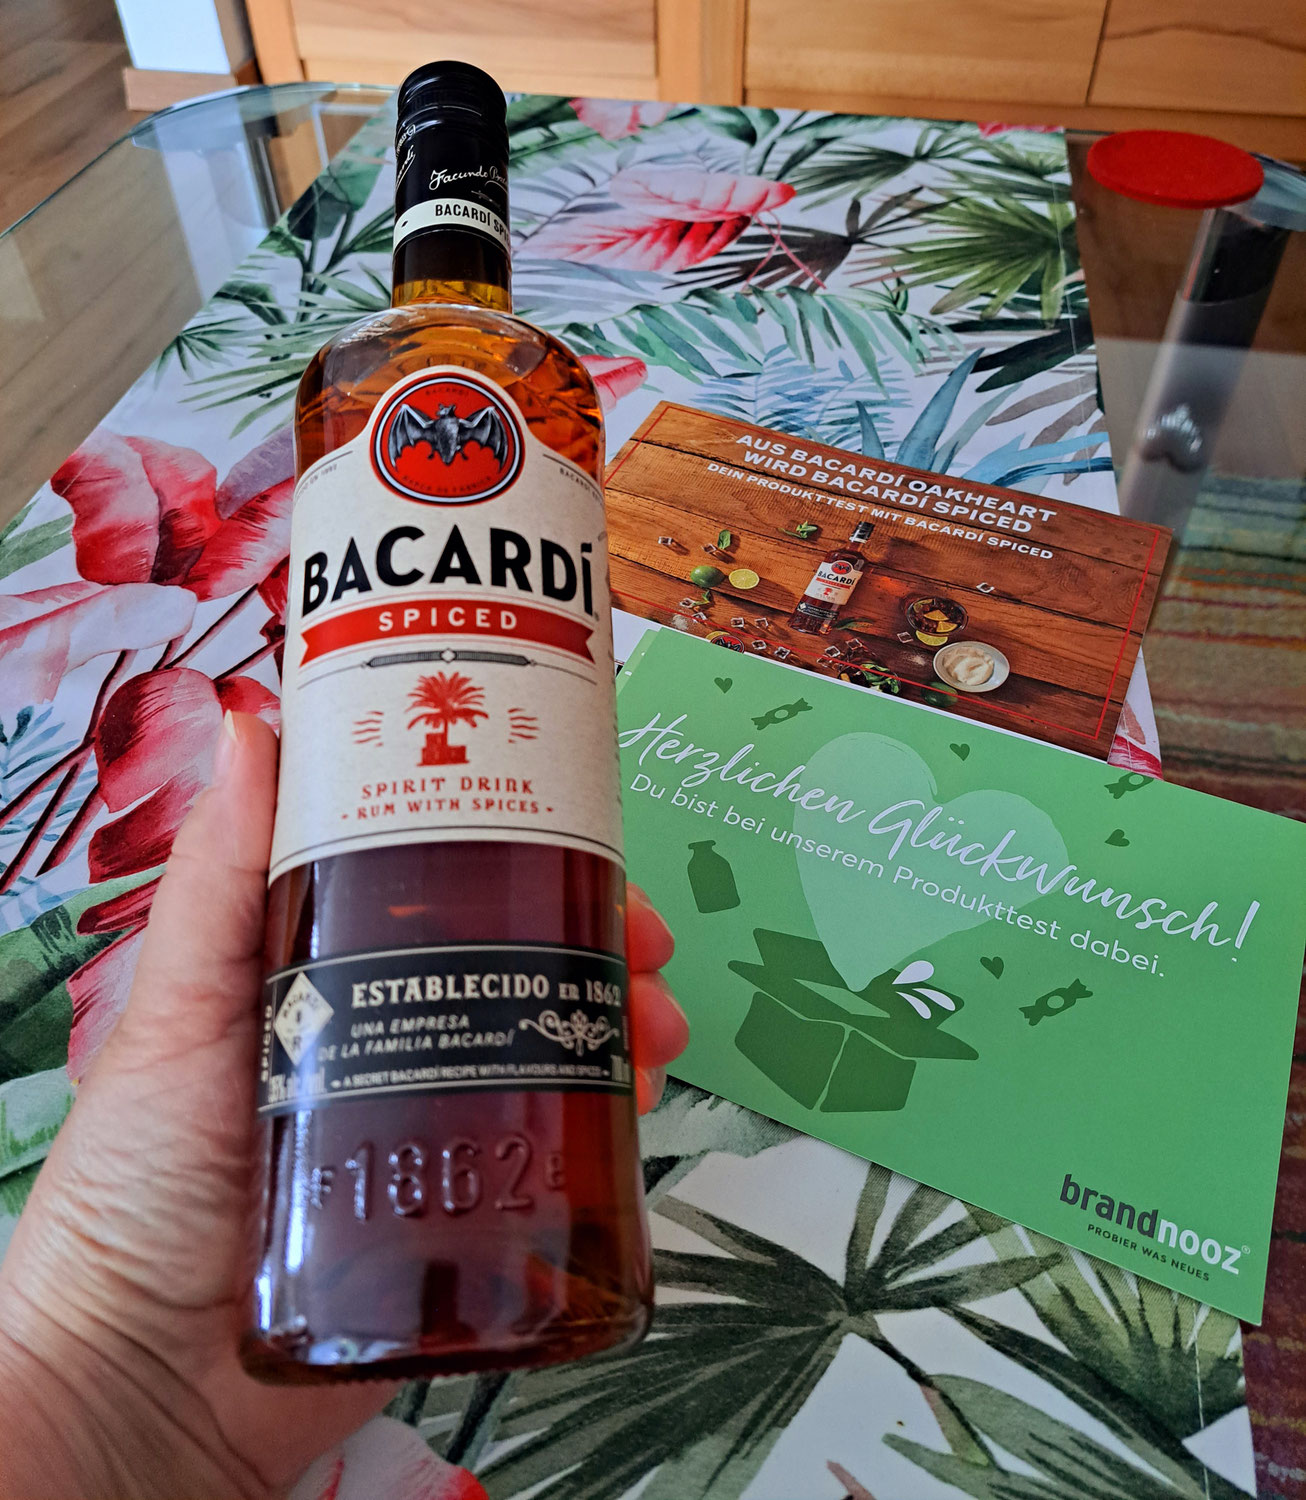 BACARDI SPICED - make more of it